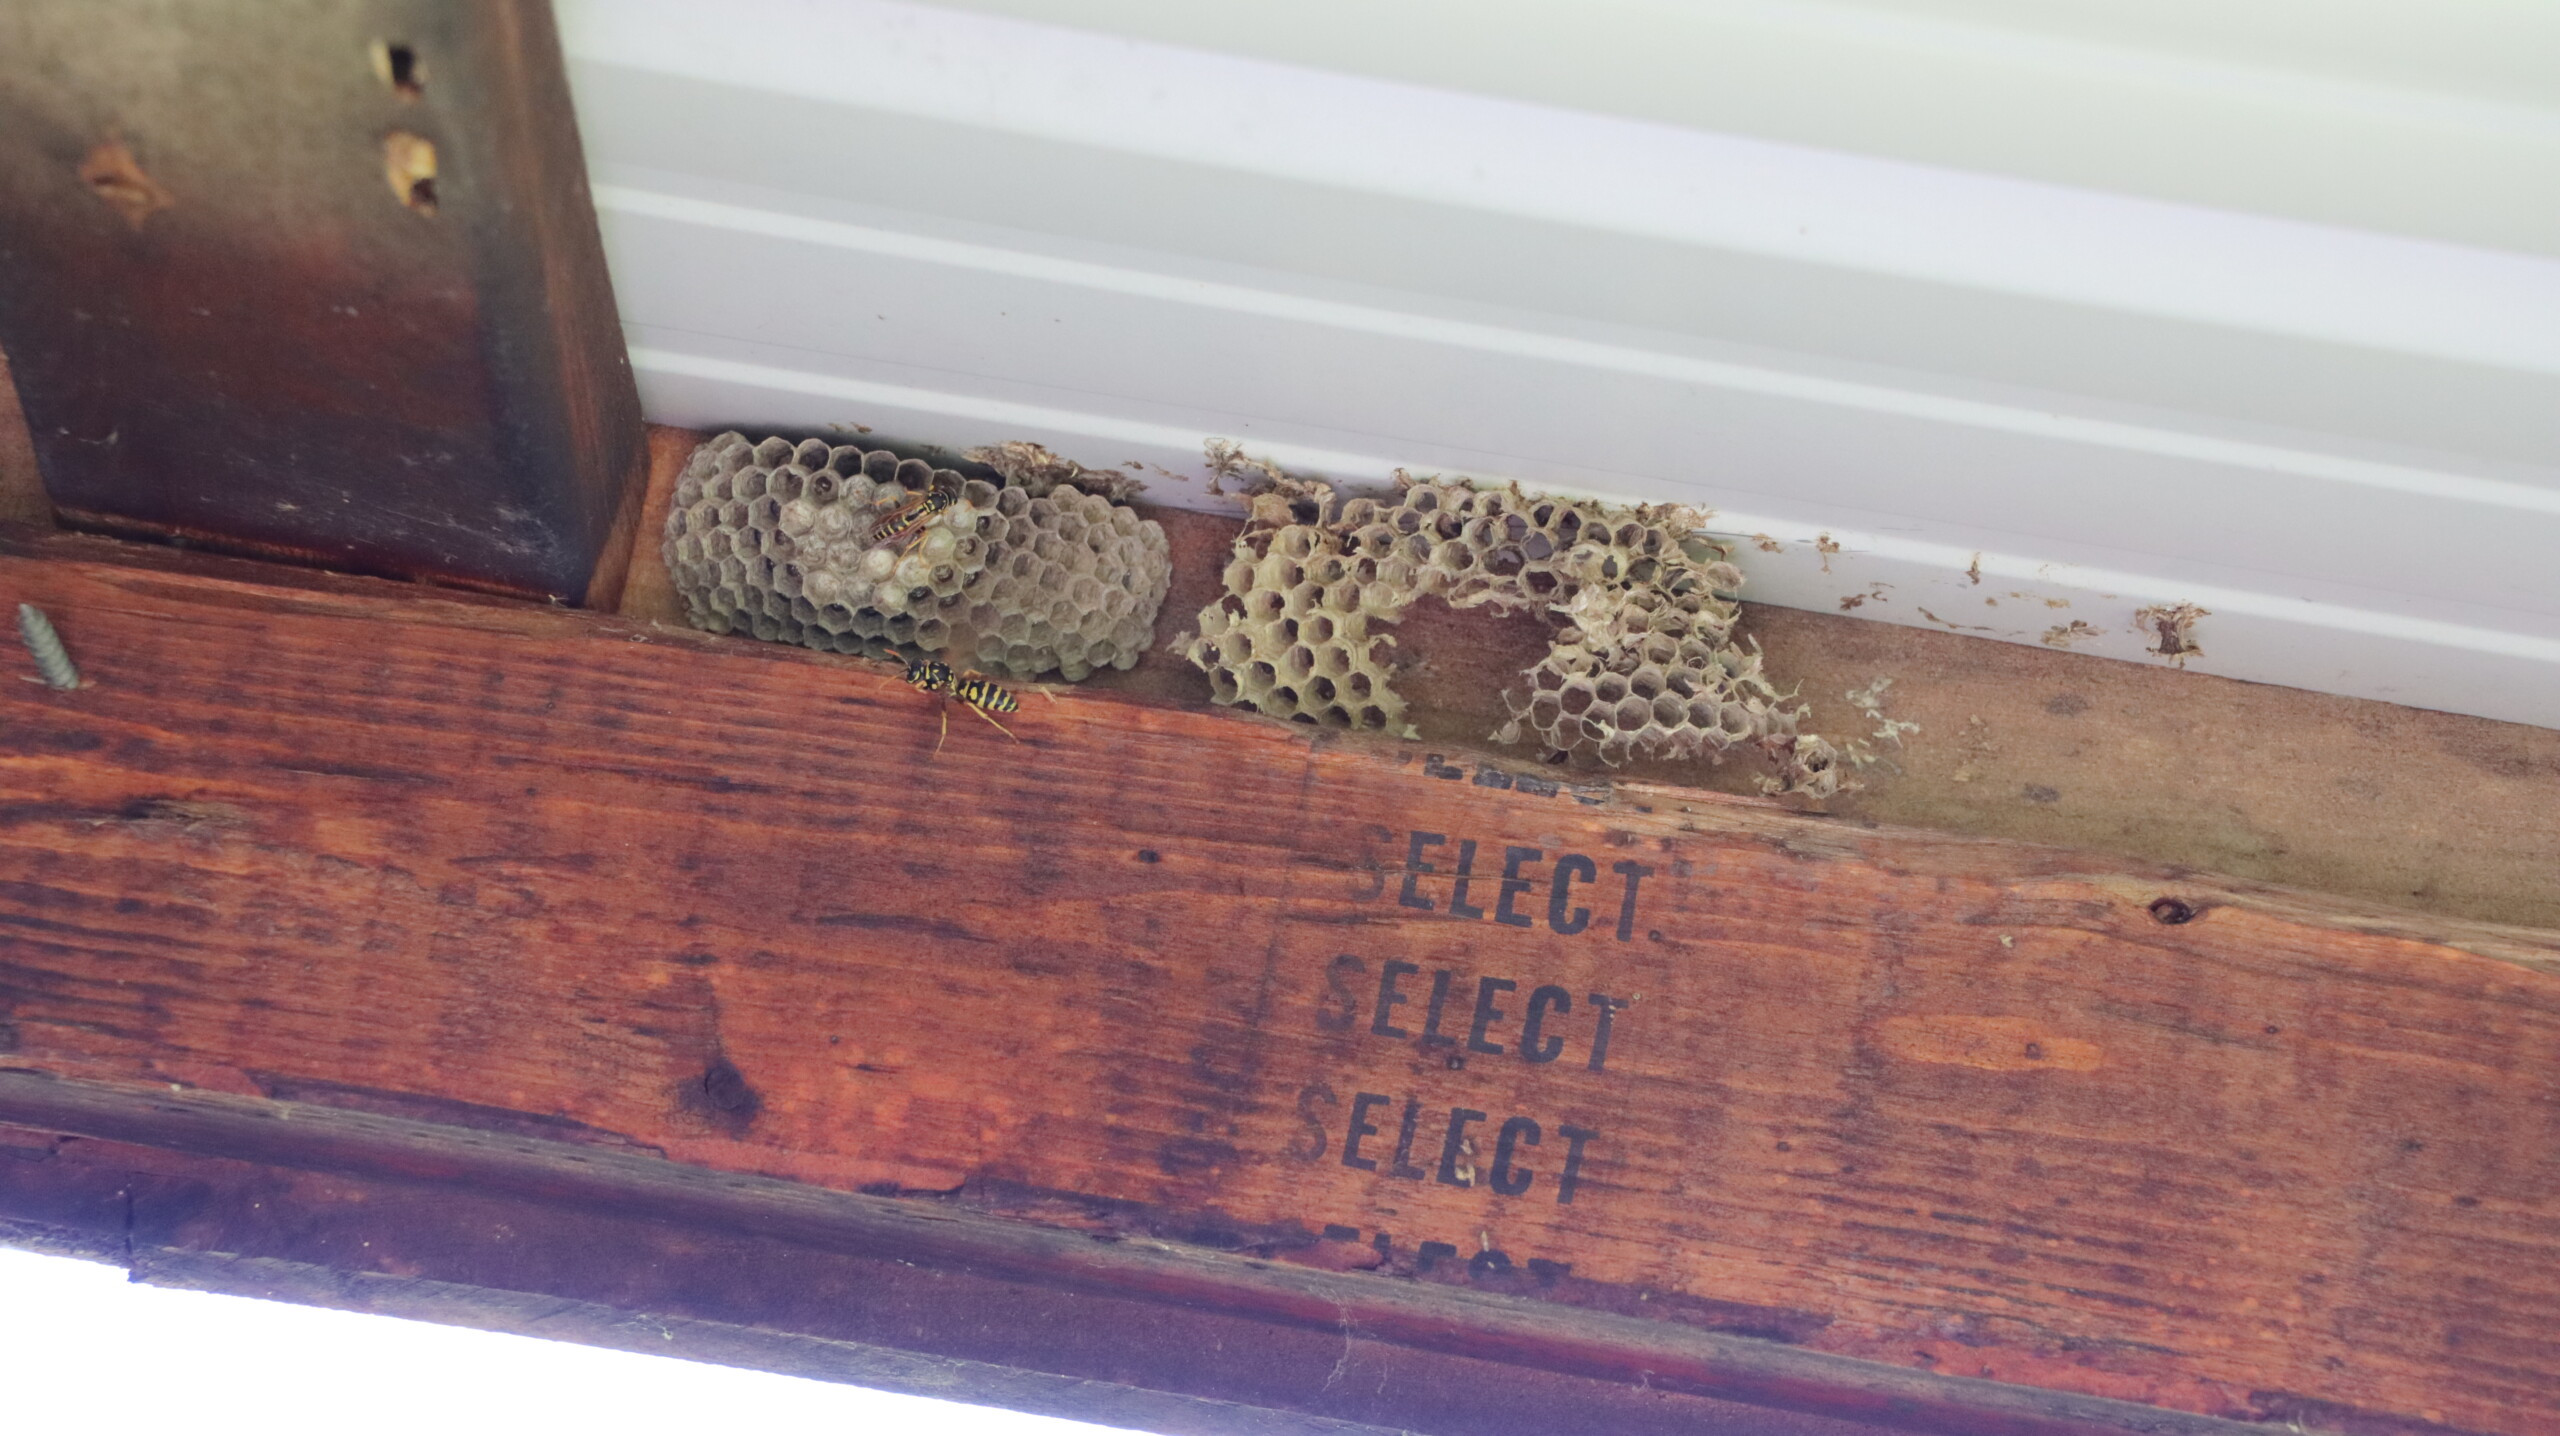 Beehive in a wooden box